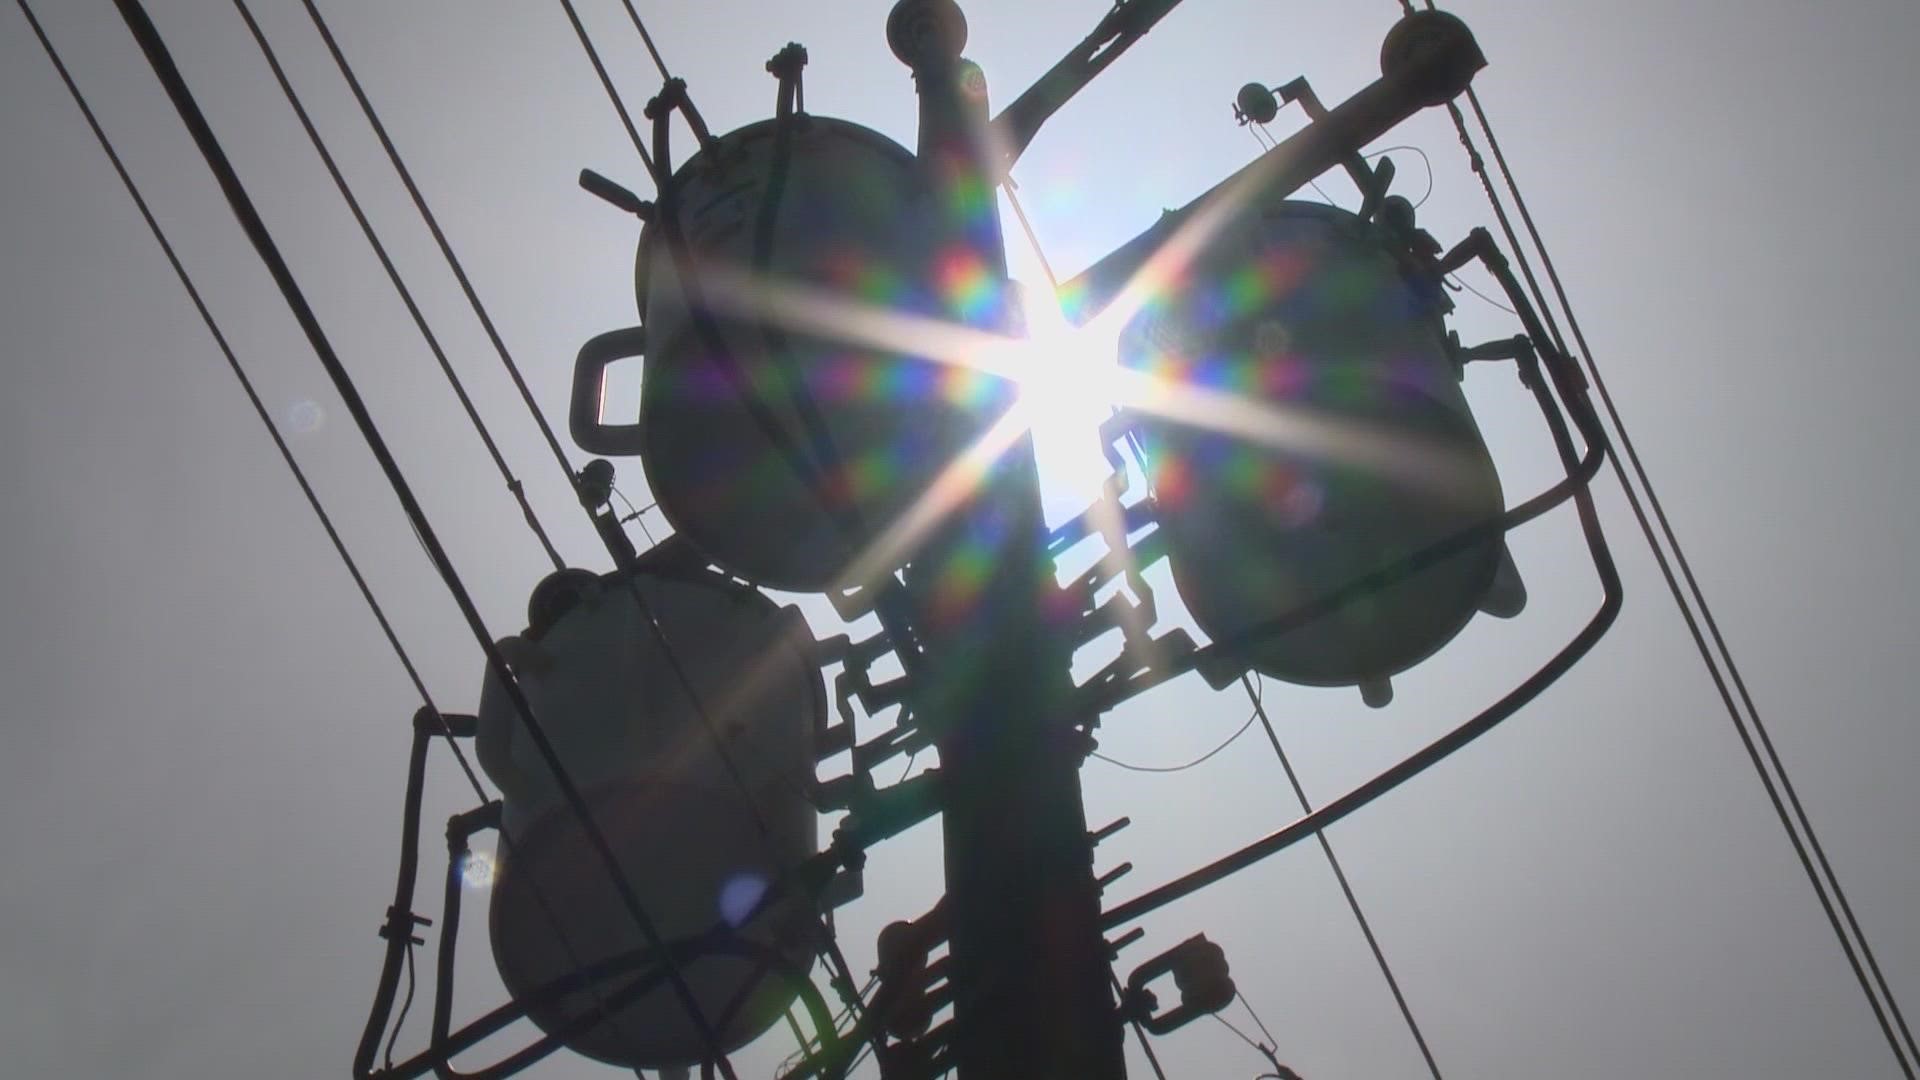 As Texans try to beat the heat, it puts more demand on the Texas power grid.